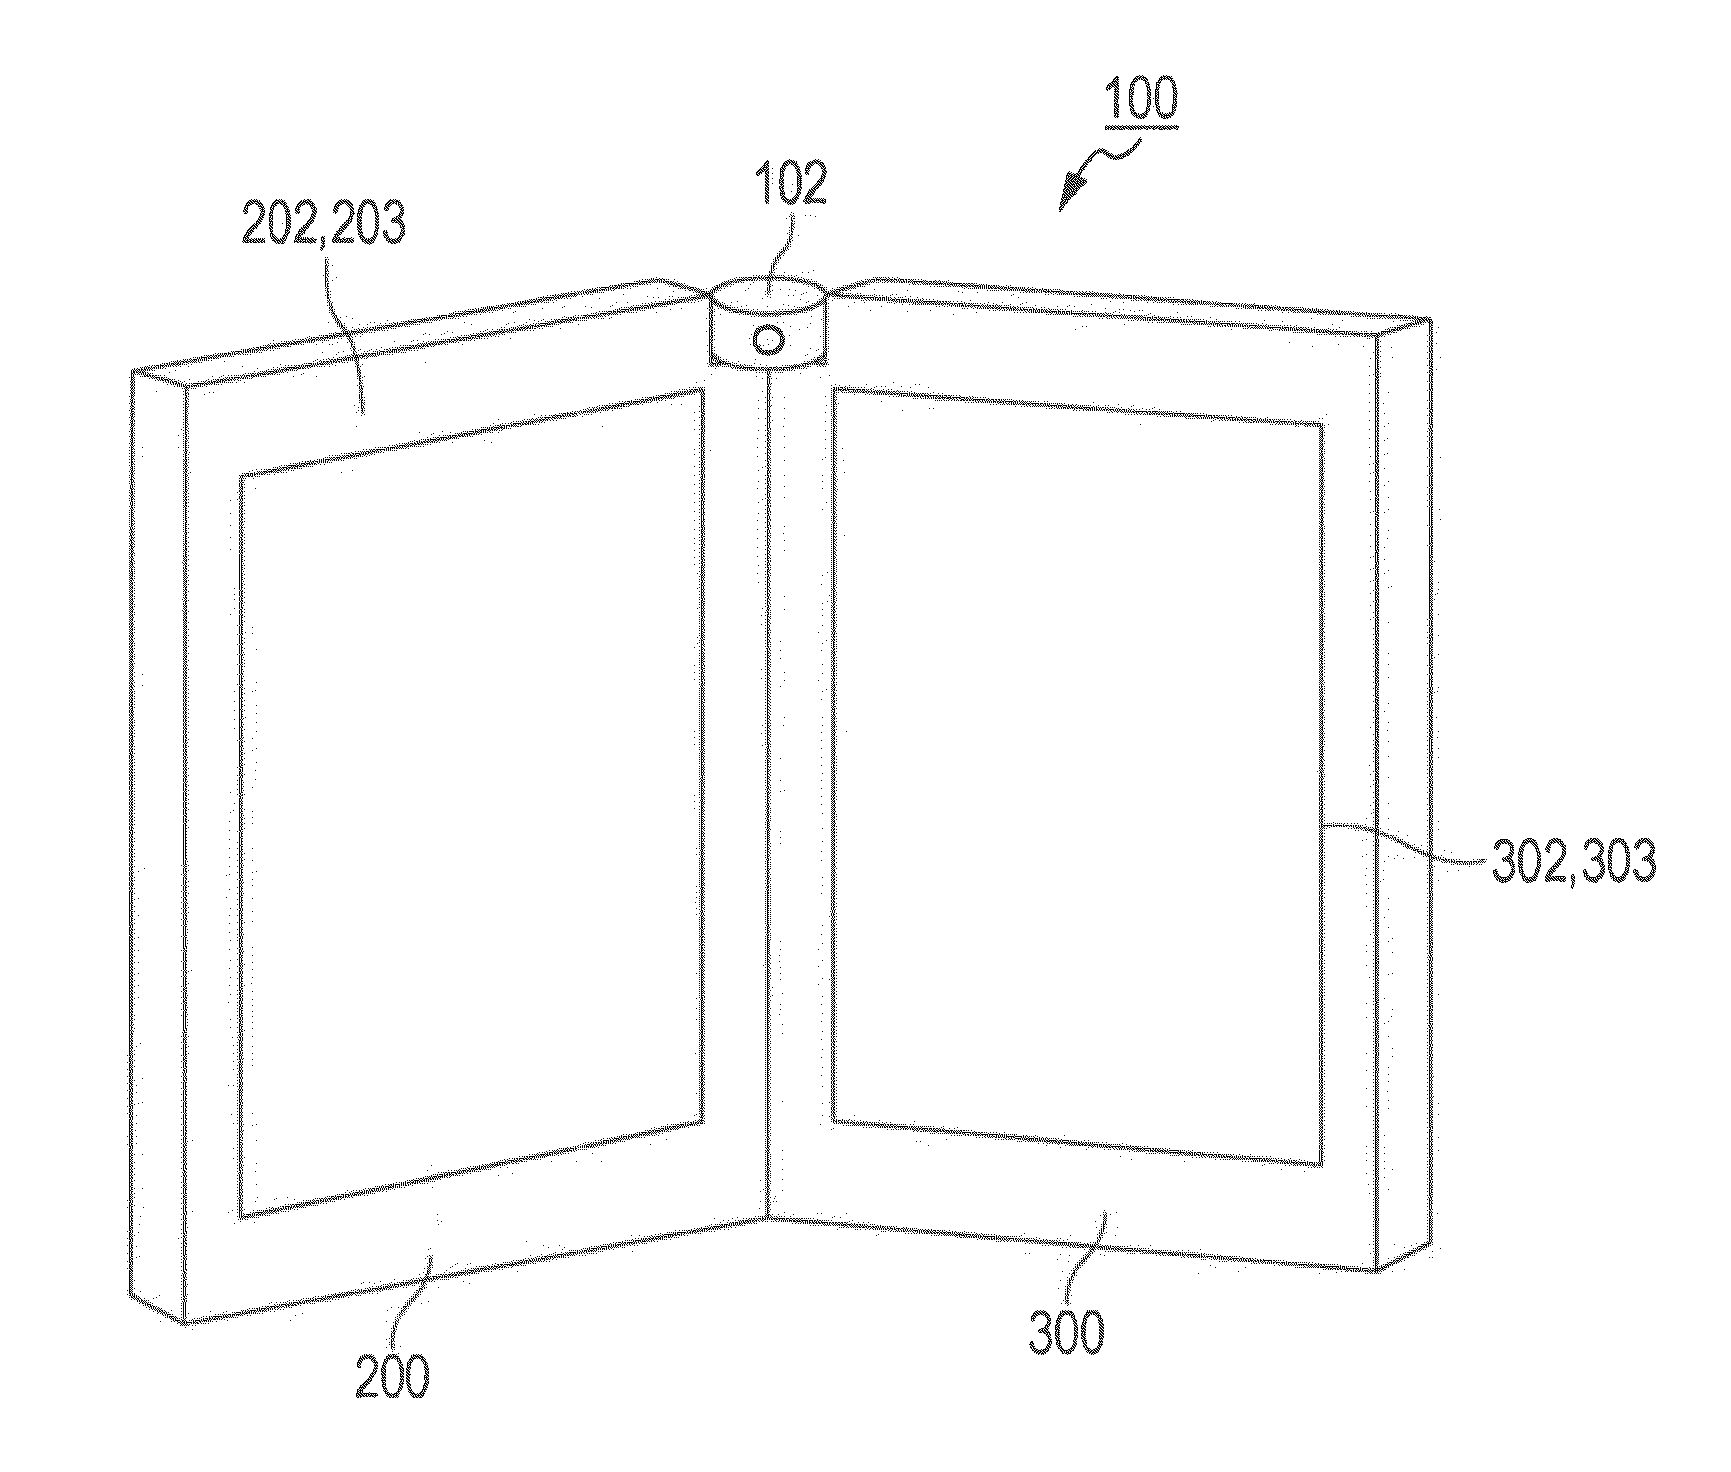 Terminal device, display method, and application computer program product